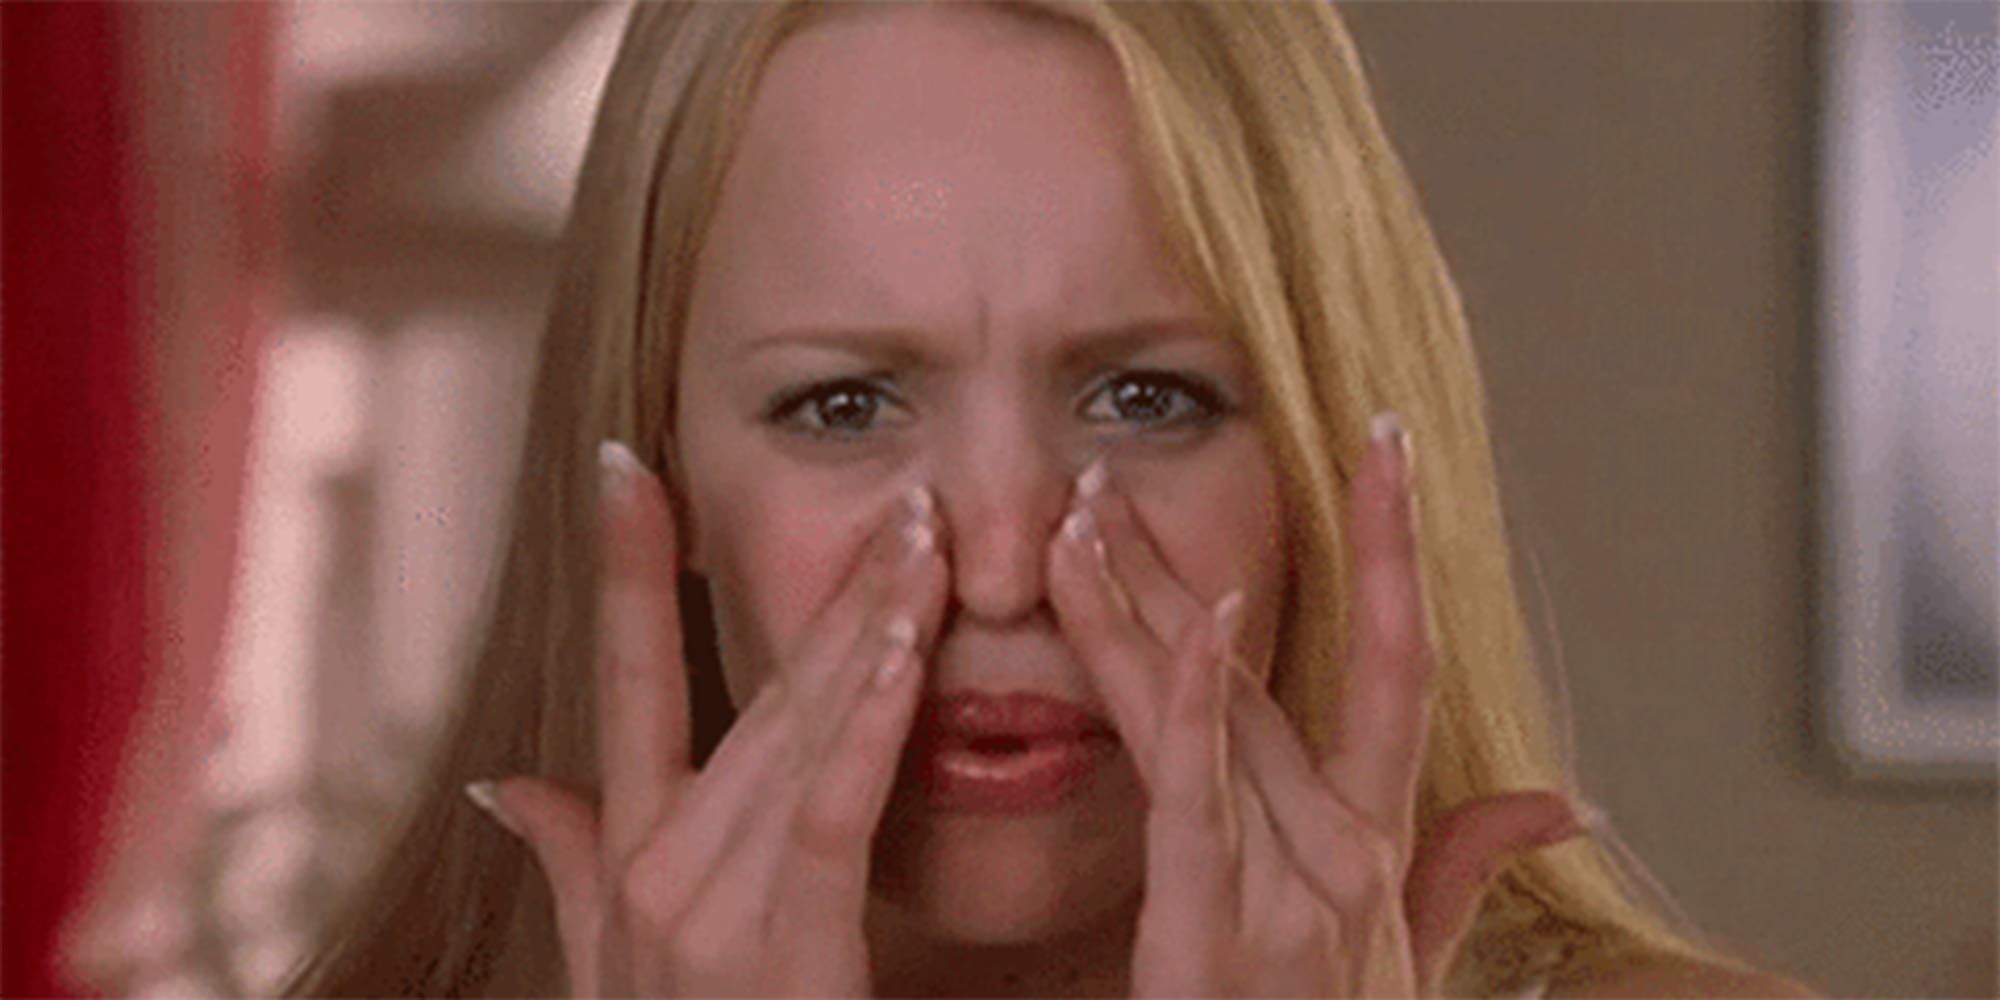 19 things you should know before dating a girl with acne picture